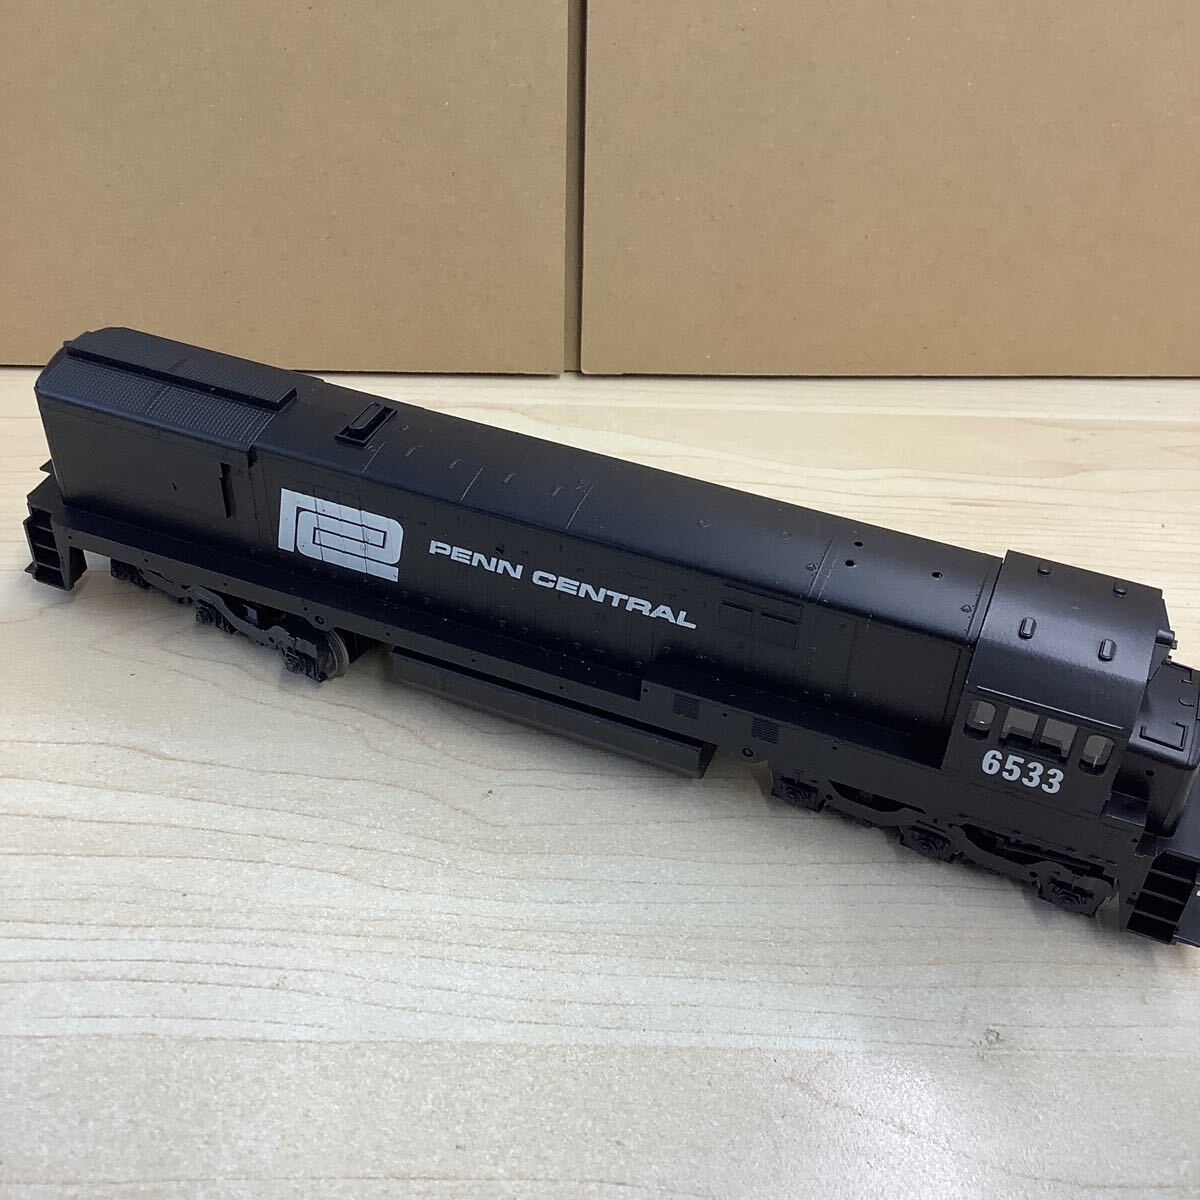 ⑩ Manufacturers details unknown foreign vehicle locomotive HO gauge present condition goods operation not yet verification Junk 